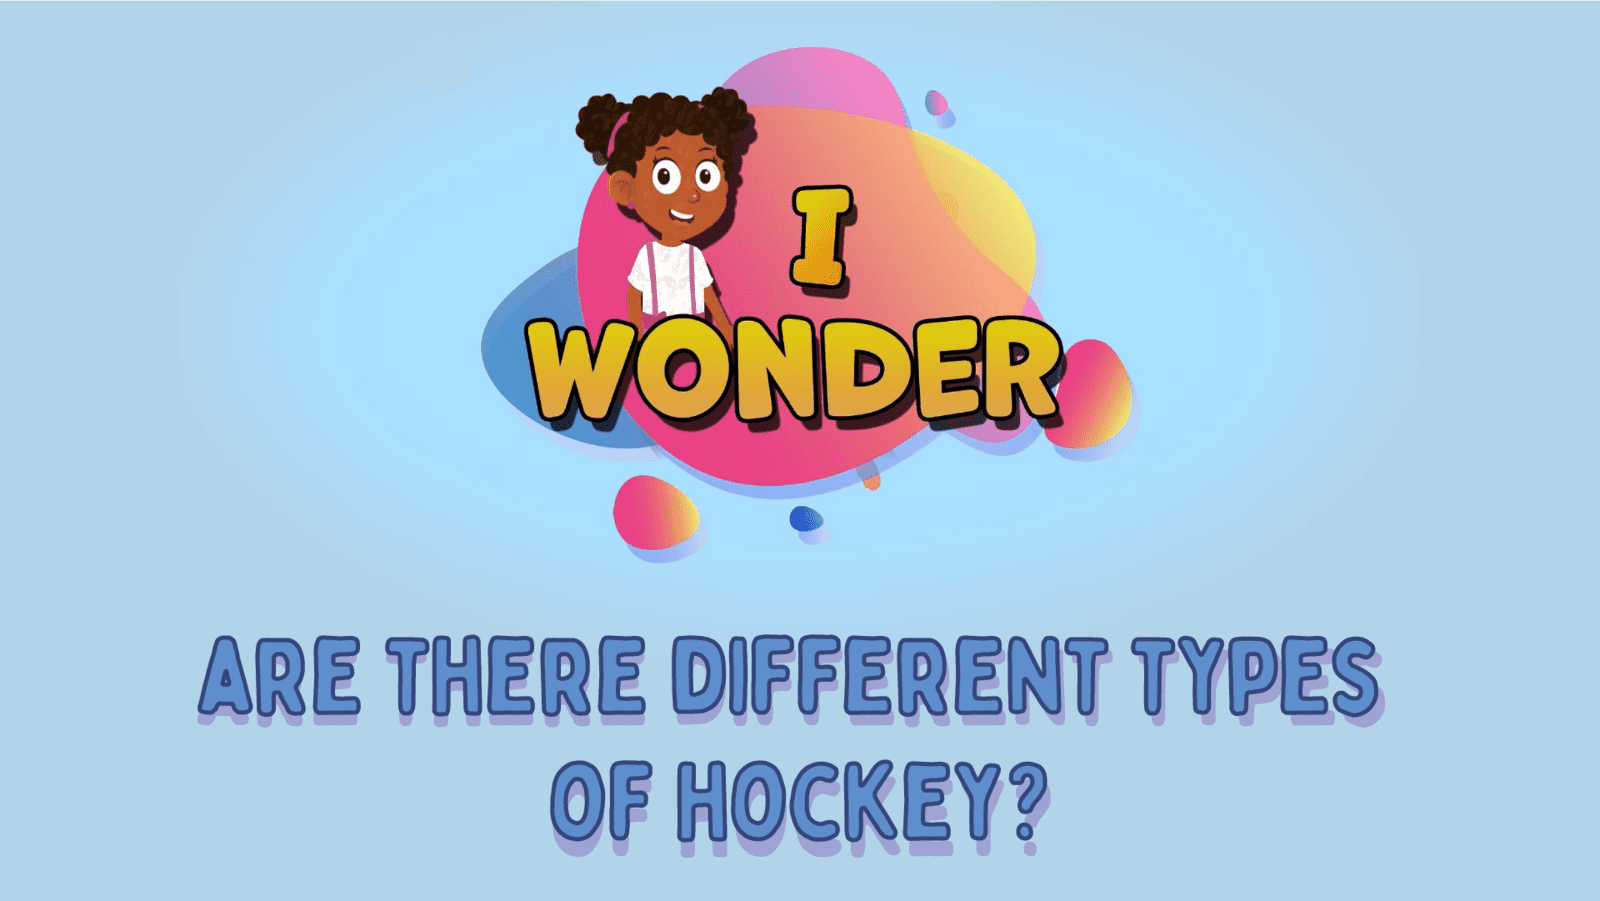 Are There Different Types Of Hockey?